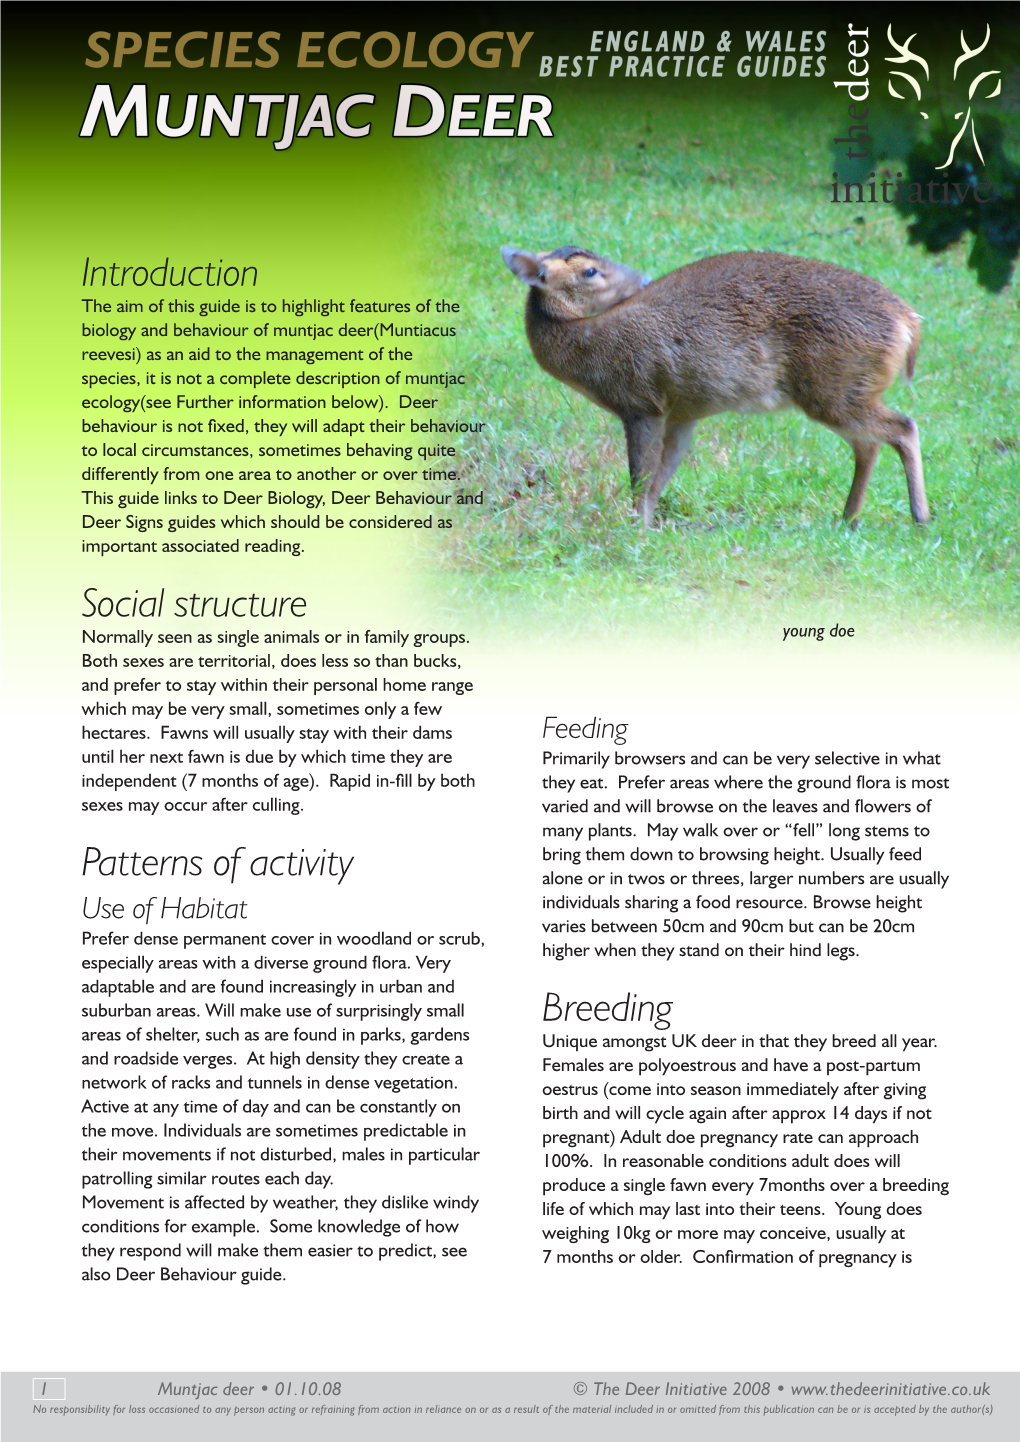 Muntjac Deer(Muntiacus Reevesi) As an Aid to the Management of the Species, It Is Not a Complete Description of Muntjac Ecology(See Further Information Below)